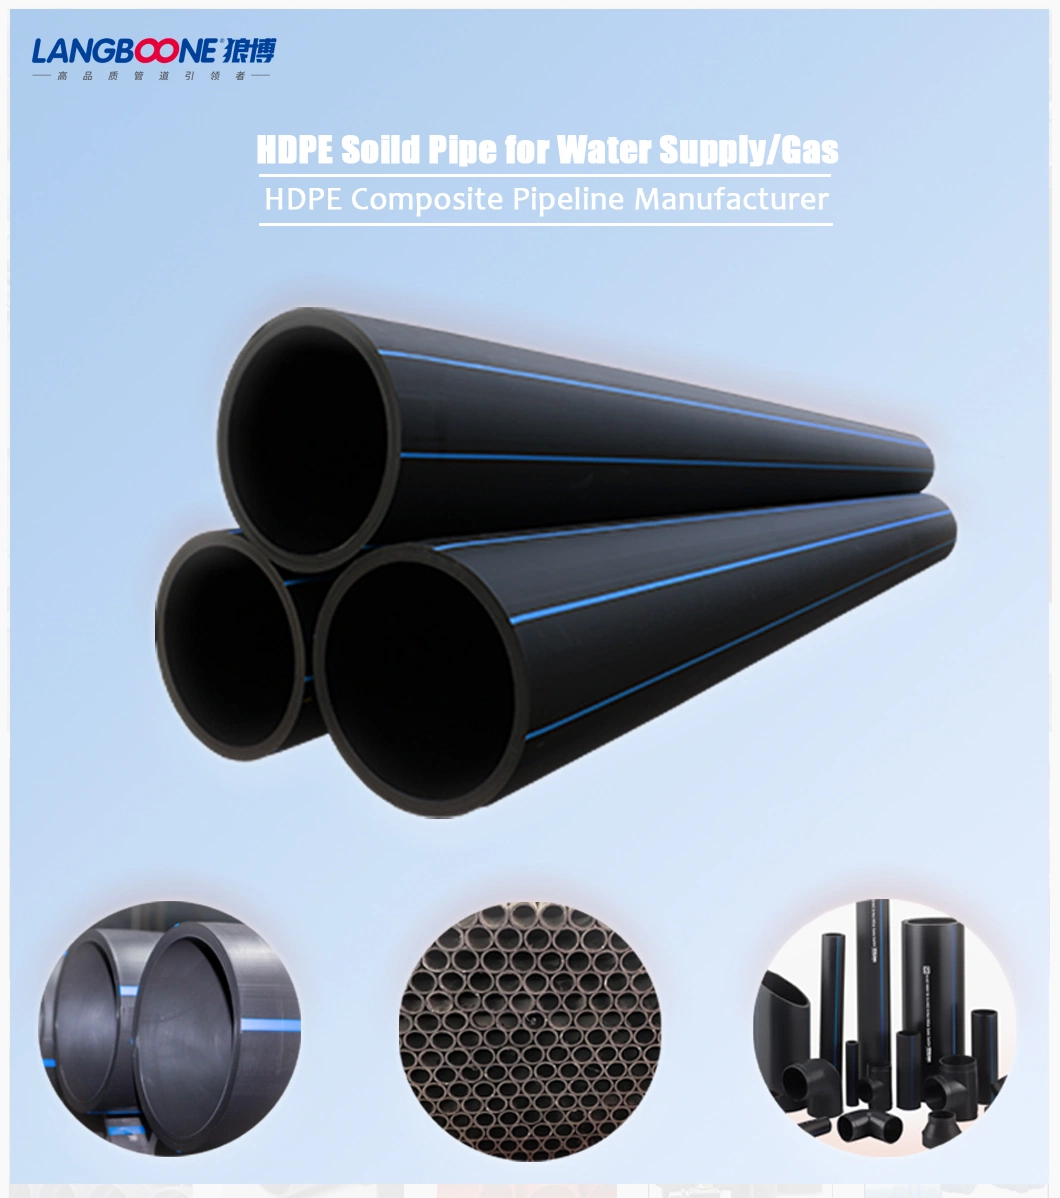 PE100/80 HDPE Dredge Pipe with Gi Flange Connection for Mining Drain